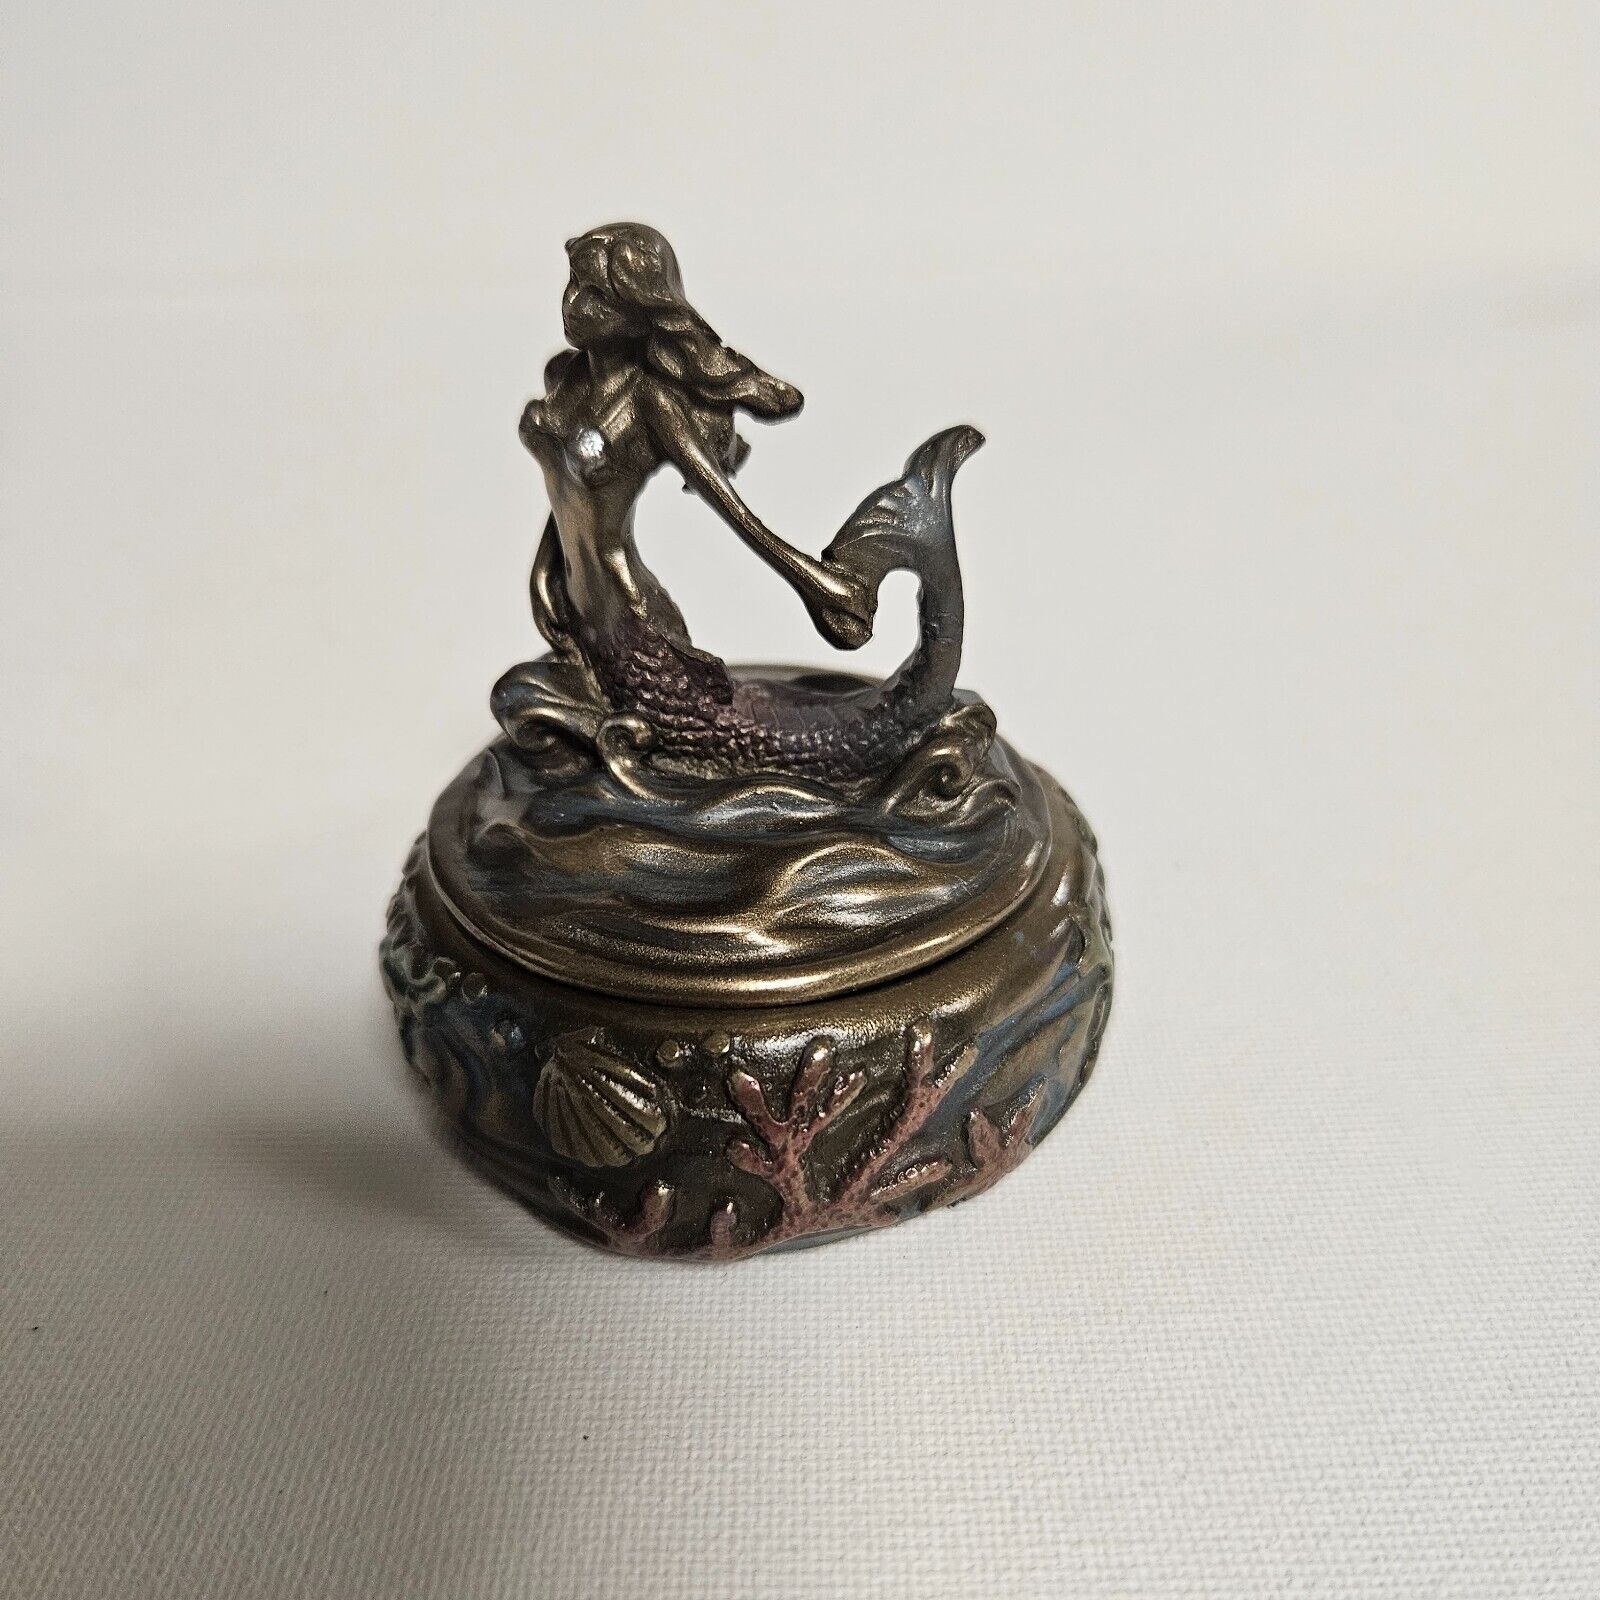 Mermaid Trinket Box Art Nouveau Bronze Look & Multicolored by Summit Collection